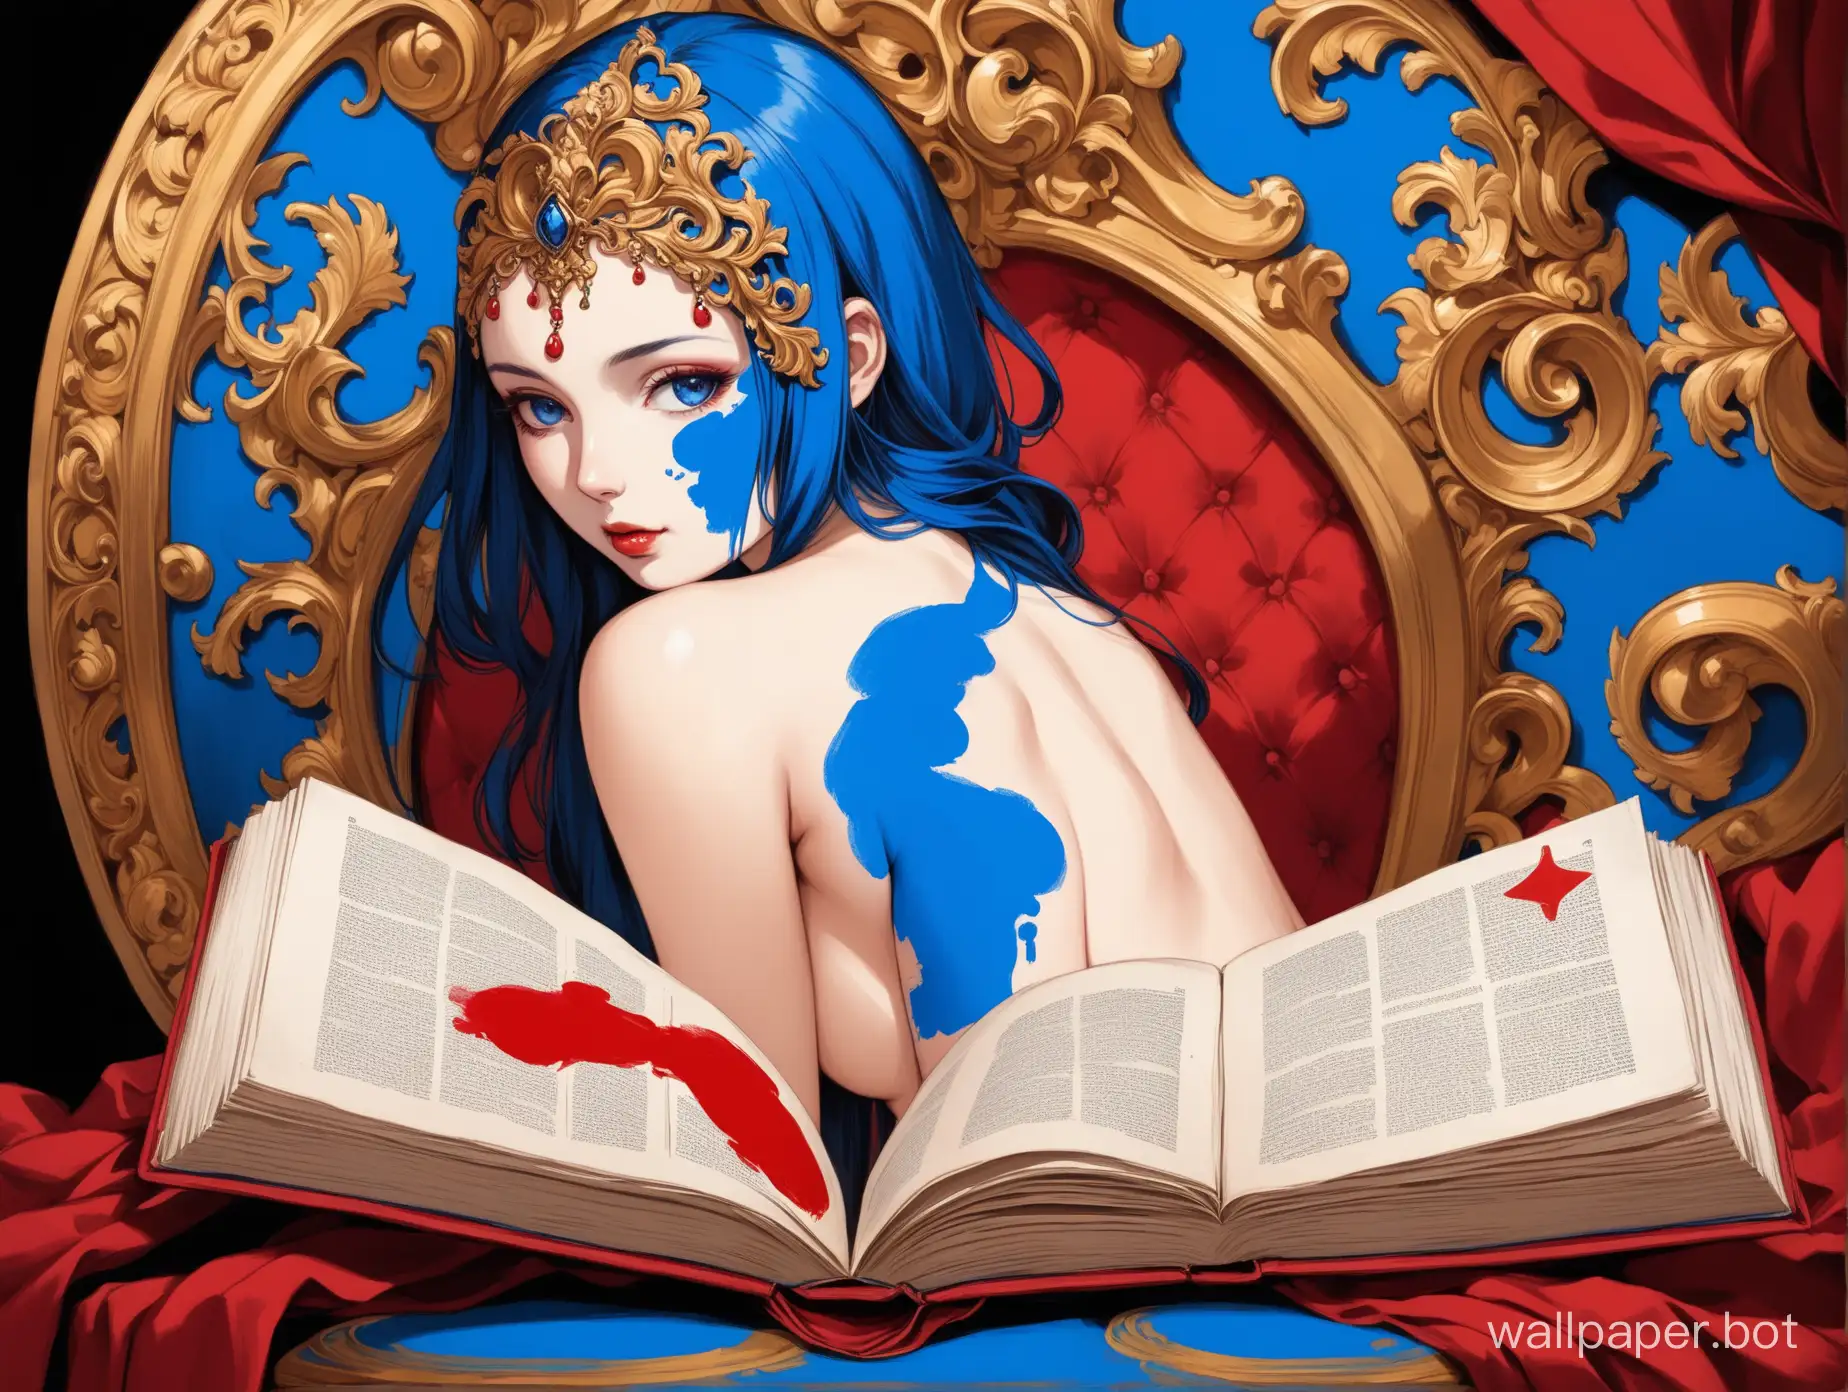 DualColored-Nude-Female-with-Baroque-Symbols-and-an-Open-Book